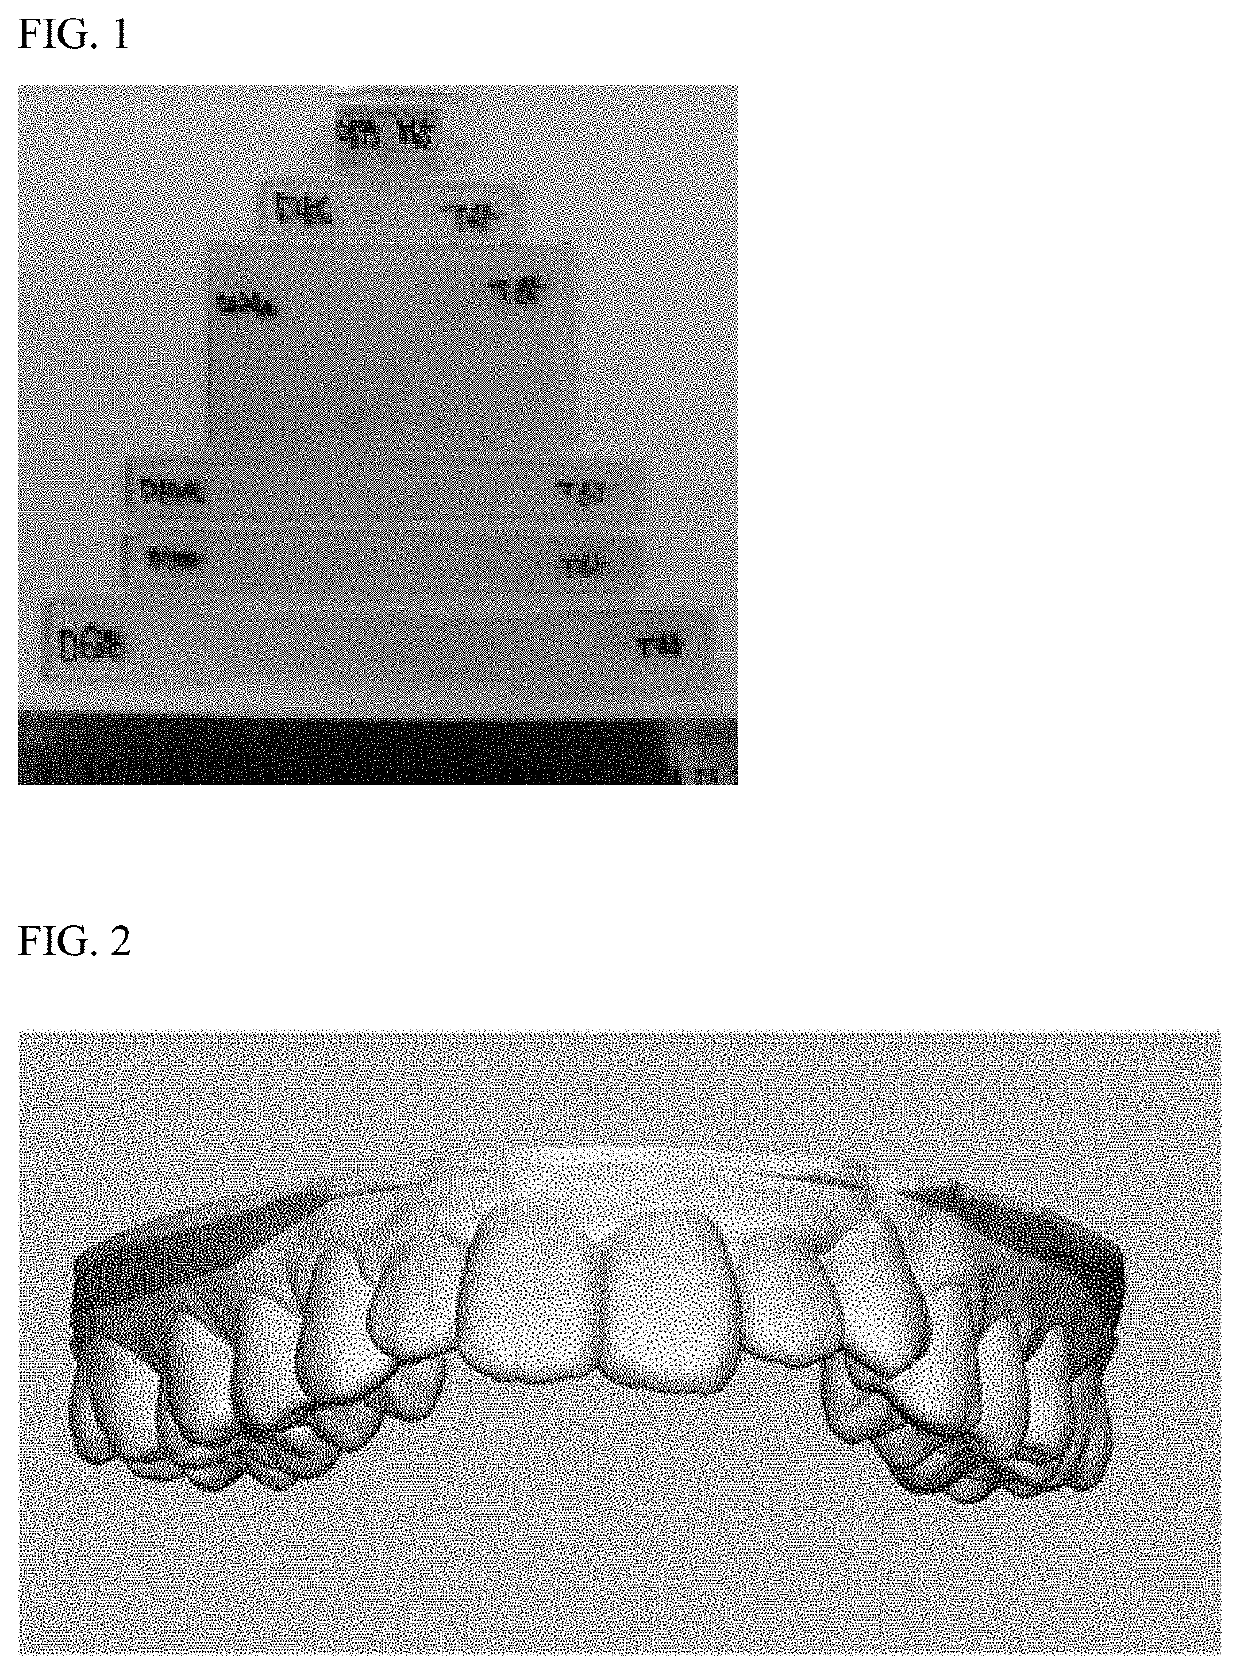 Photocurable composition for 3D printer for producing transparent orthodontic device